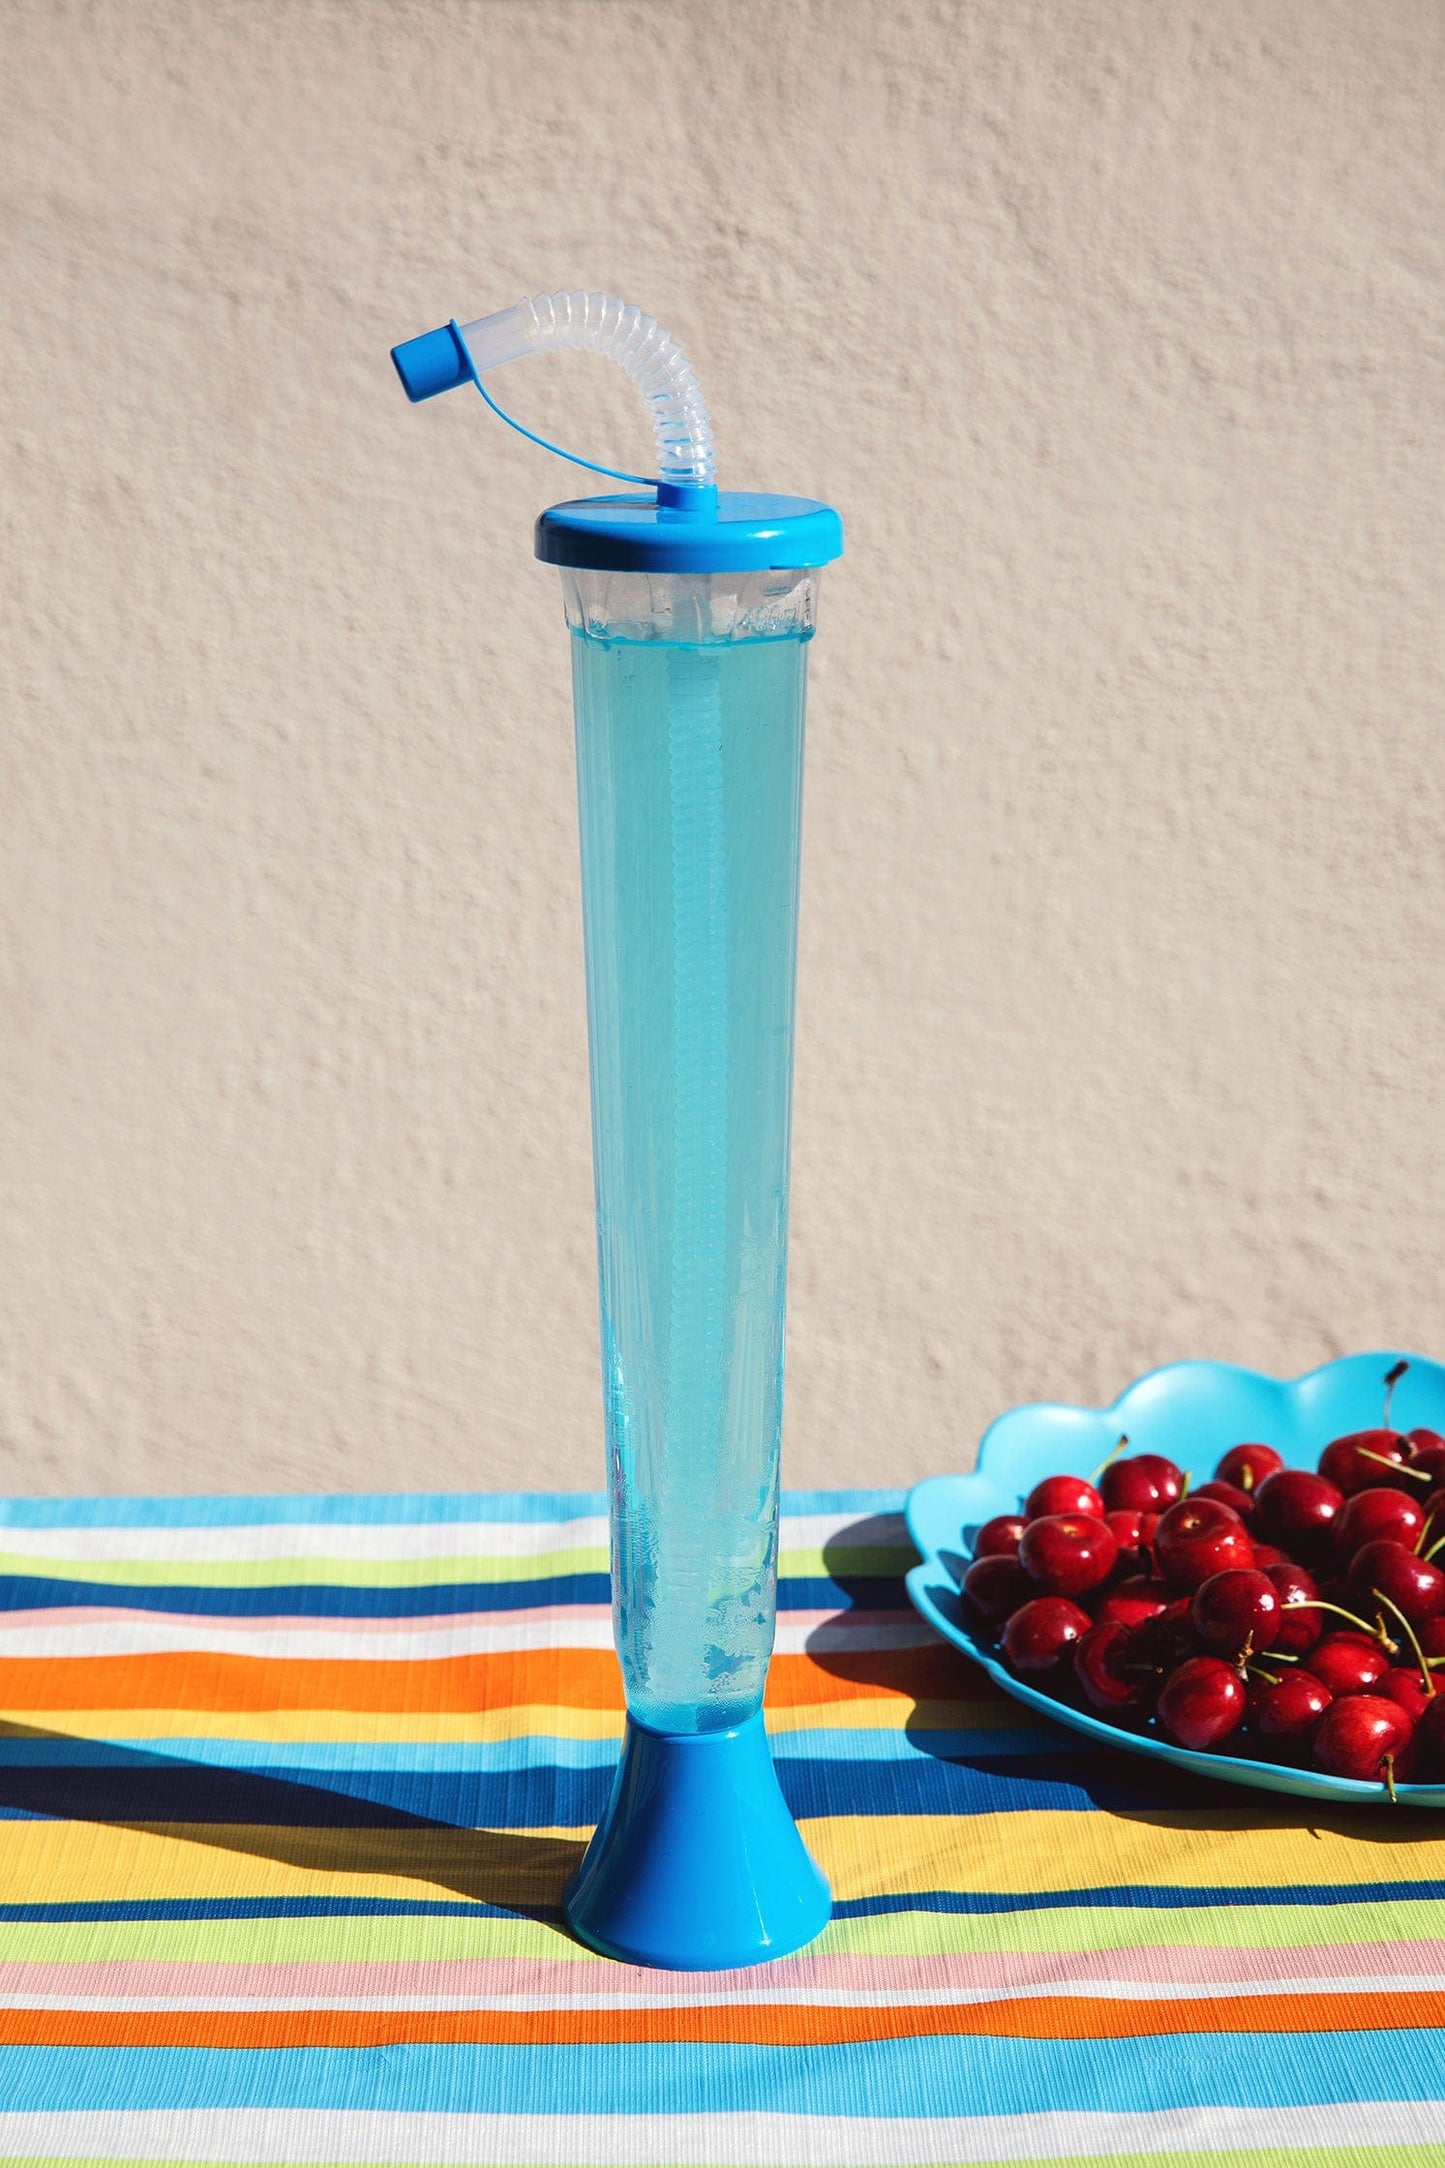 Sweet World USA Yard Cups (54 or 108 Cups) Yard Cups with BLUE Lids and Straws - 14oz - for Margaritas and Frozen Drinks cups with lids and straws